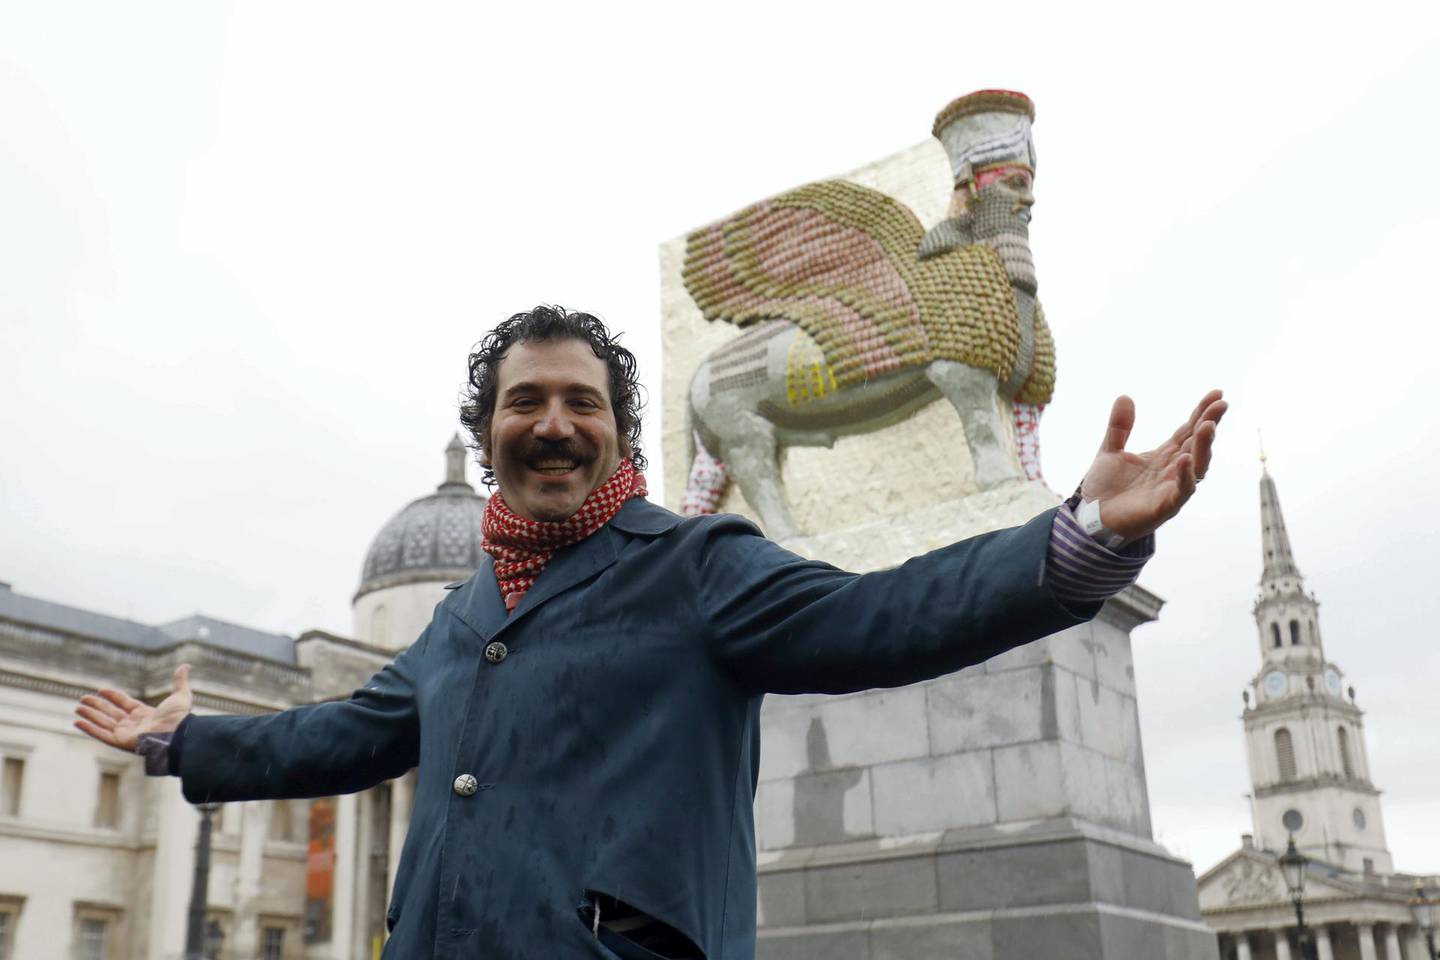 Iraqi-American artist Michael Rakowitz poses in front of his sculpture "The Invisible Enemy Should Not Exist" standing on the Fourth Plinth in Trafalgar Square in London on March 28, 2018 after it was unveiled. - The sculpture, made from 10,500 empty date syrup cans, is a recreation of a first-millenium-BC Lamassu, a winged bull and protective deity, that stood at the entrance to Nergal Gate of Nineveh and was destoryed by the Islamic State group in 2015. (Photo by Tolga AKMEN / AFP) / RESTRICTED TO EDITORIAL USE - MANDATORY MENTION OF THE ARTIST UPON PUBLICATION - TO ILLUSTRATE THE EVENT AS SPECIFIED IN THE CAPTION